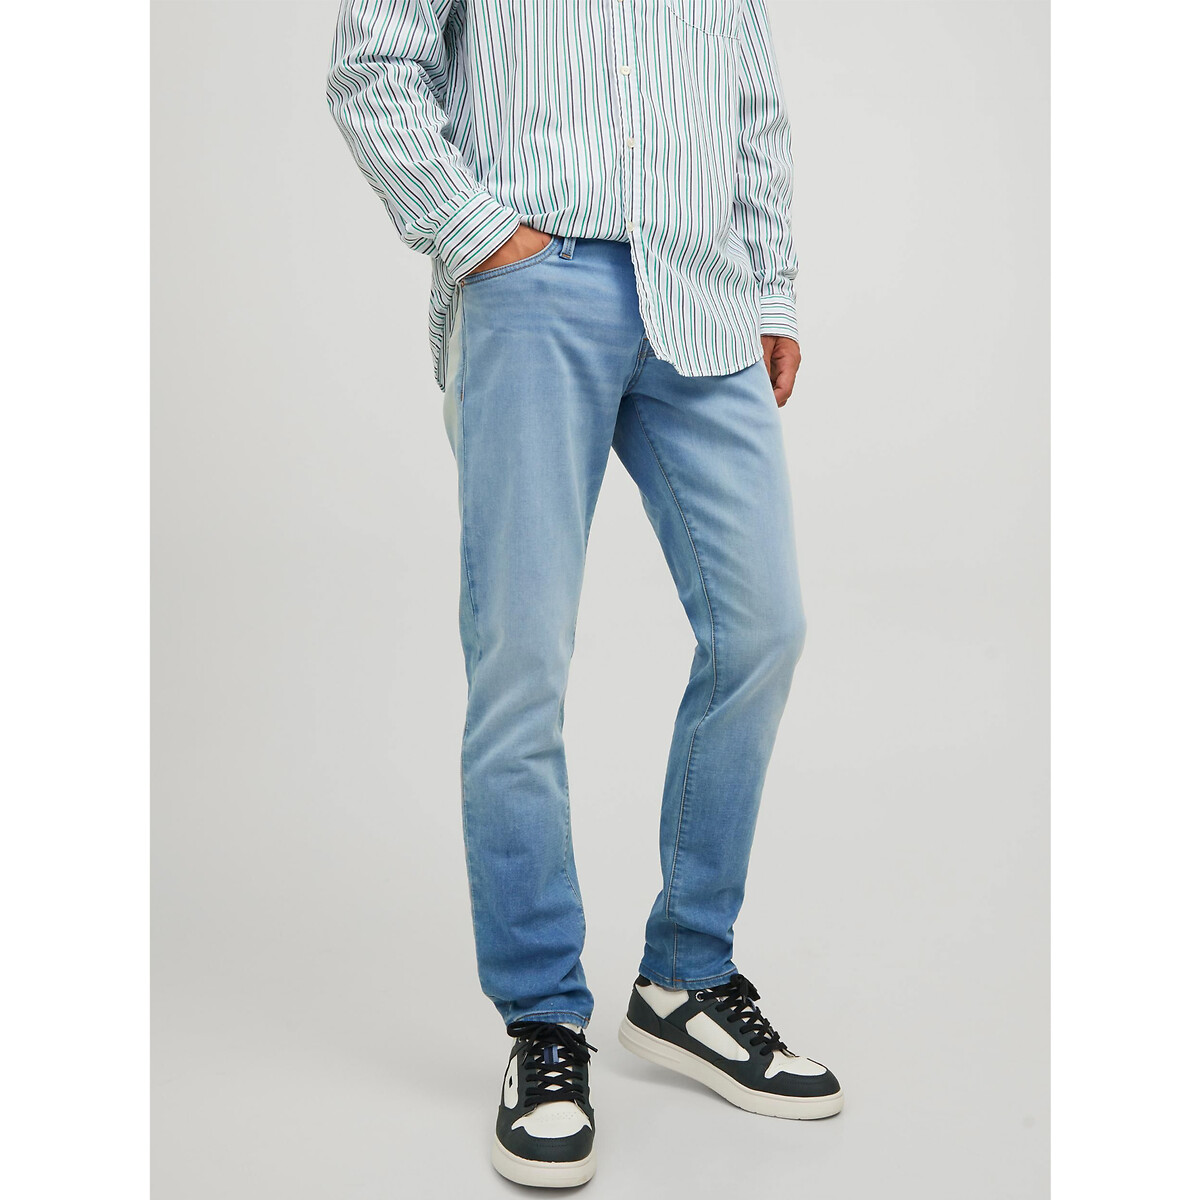 Image of Glenn Slim Fit Jeans in Mid Rise